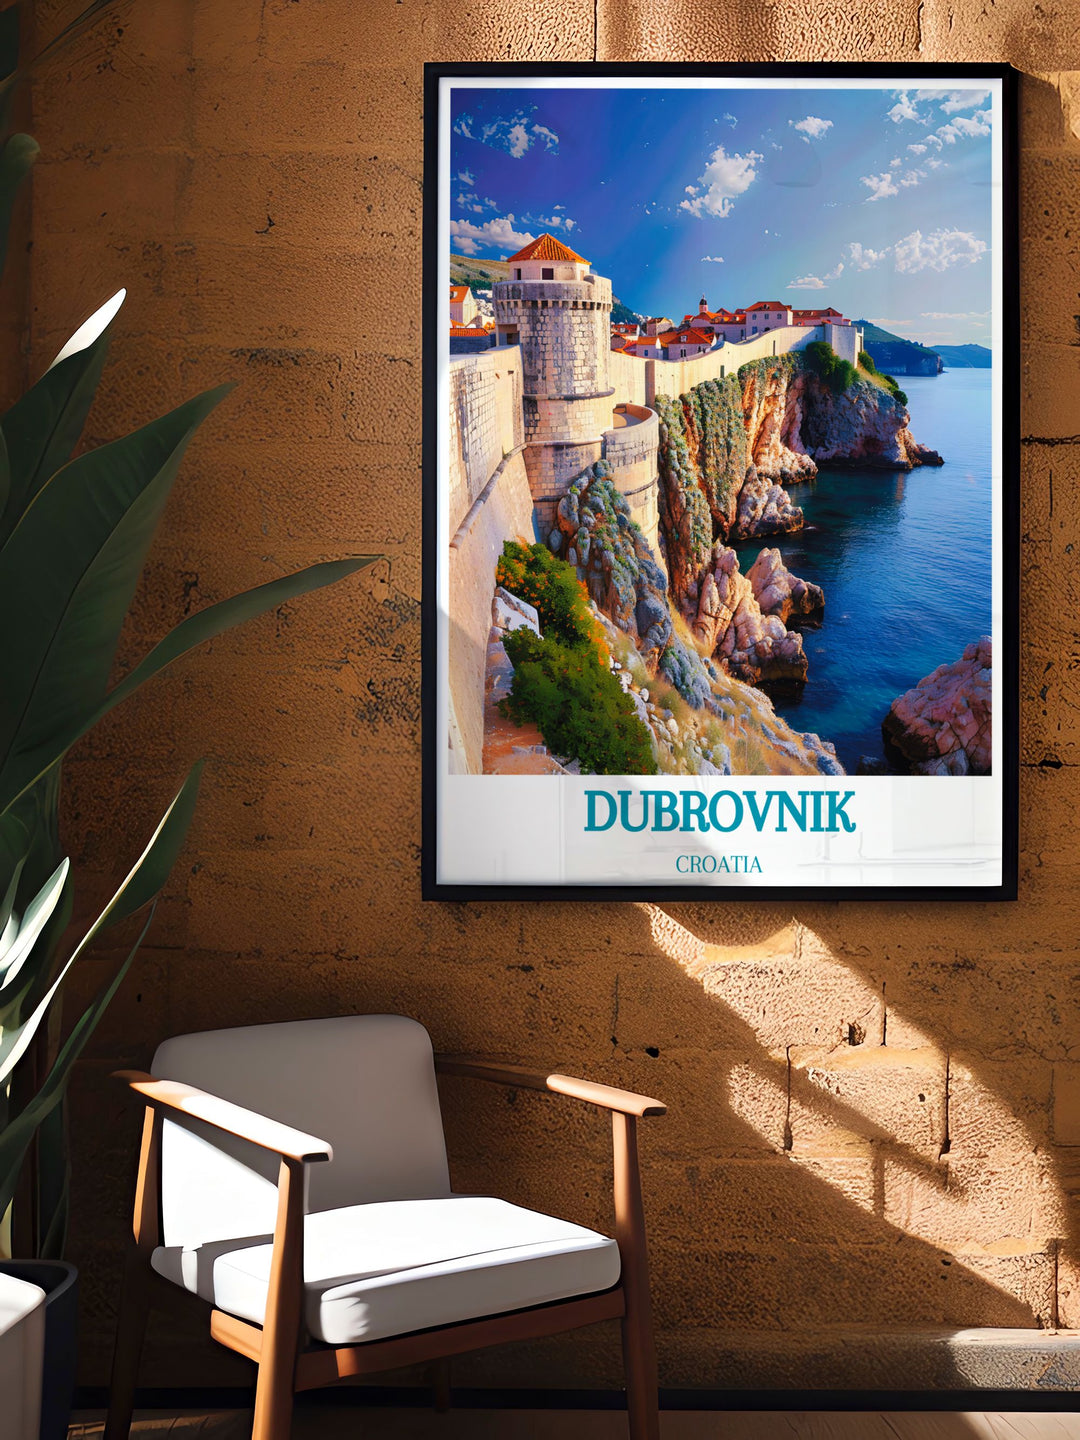 Travel poster of Dubrovnik highlighting the majestic views from the city walls, ideal for adventure enthusiasts and history lovers.